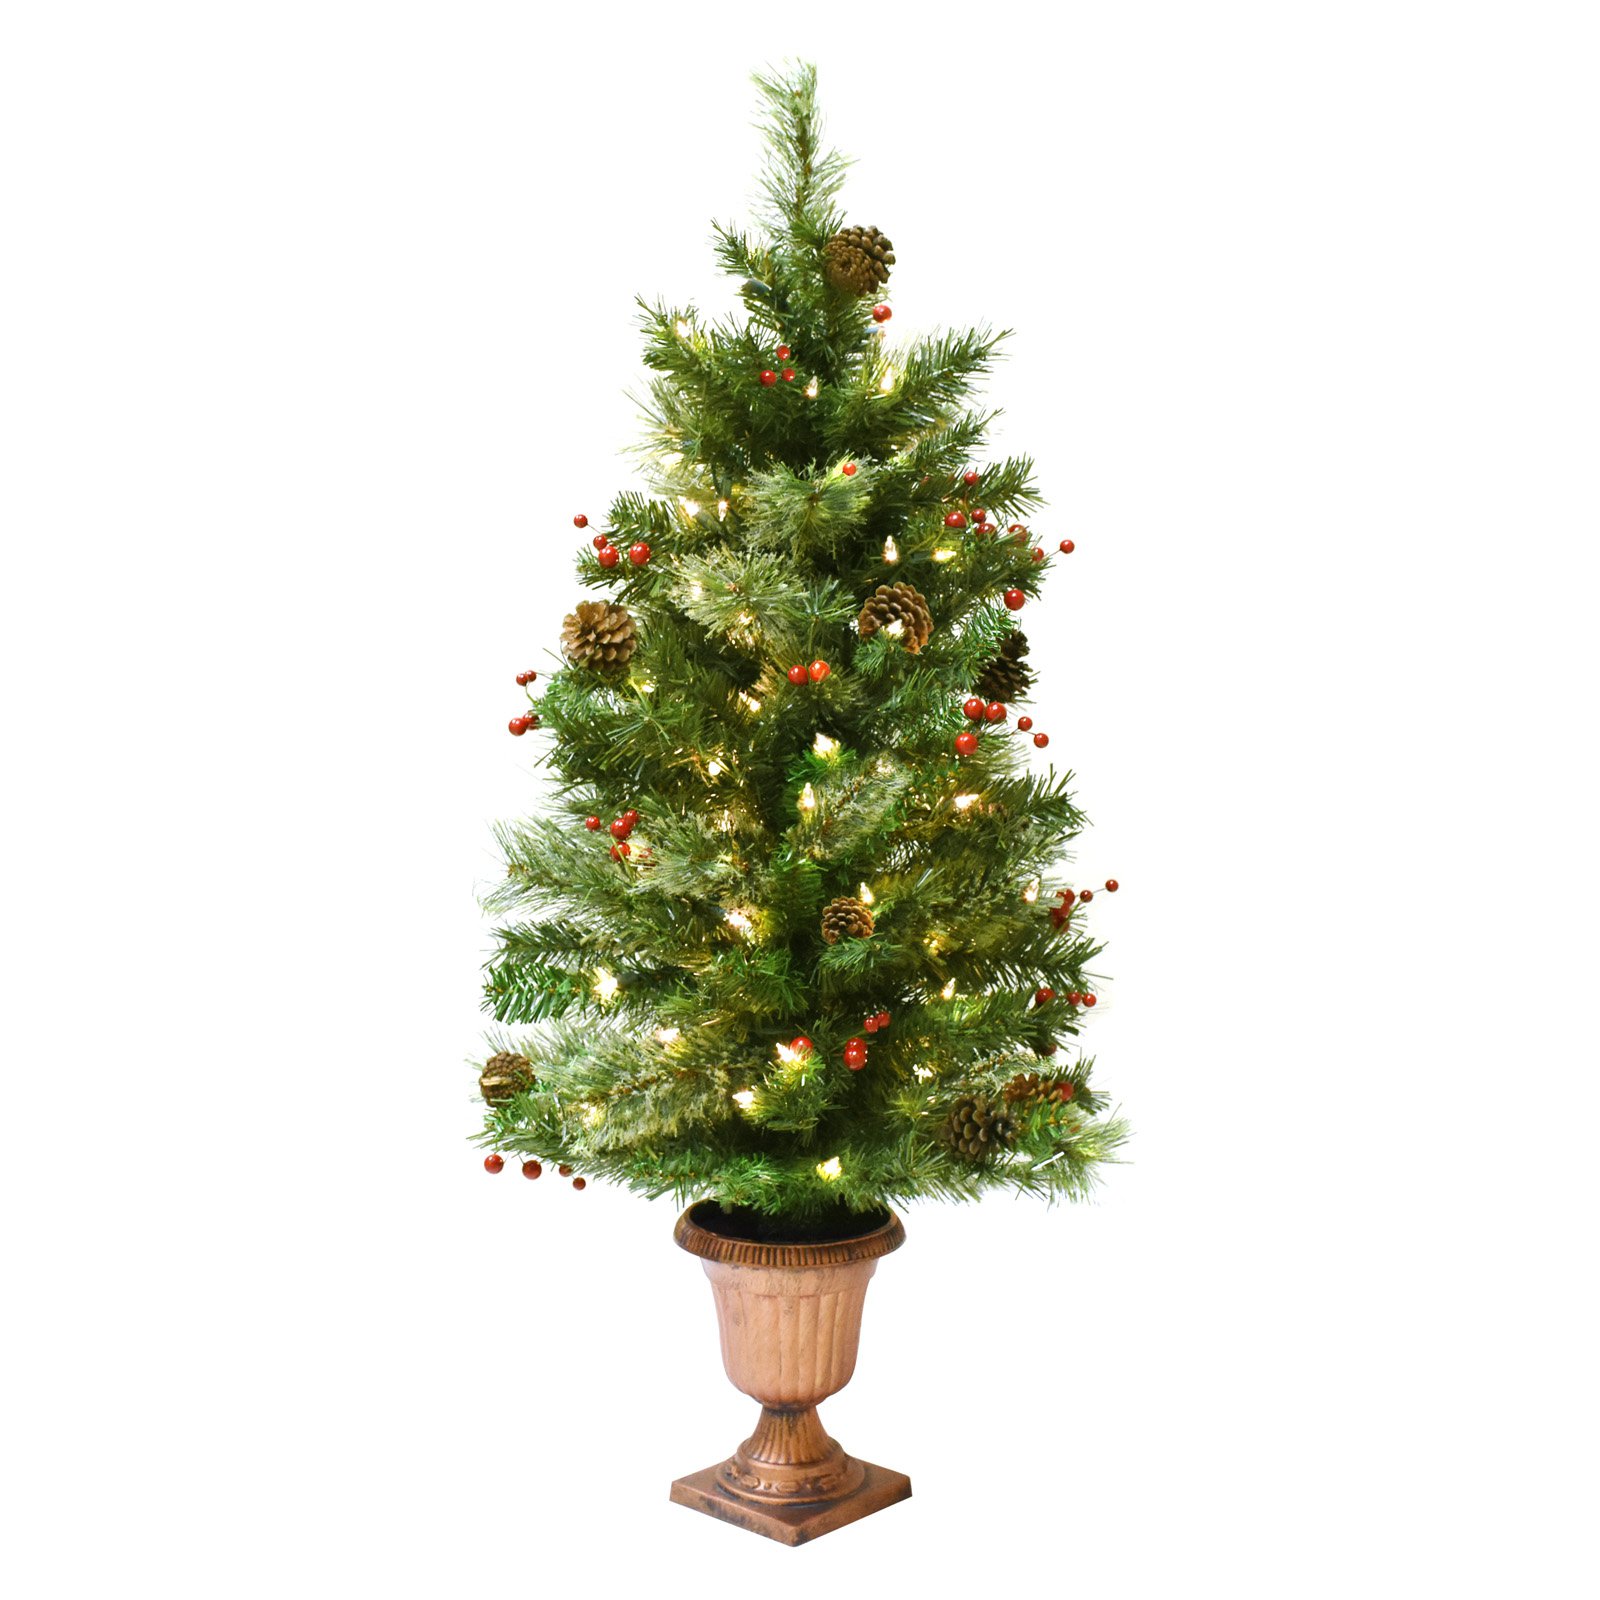 Astella-3.5' Pre-Lit Christmas with Ornaments and Urn Stand - image 2 of 2